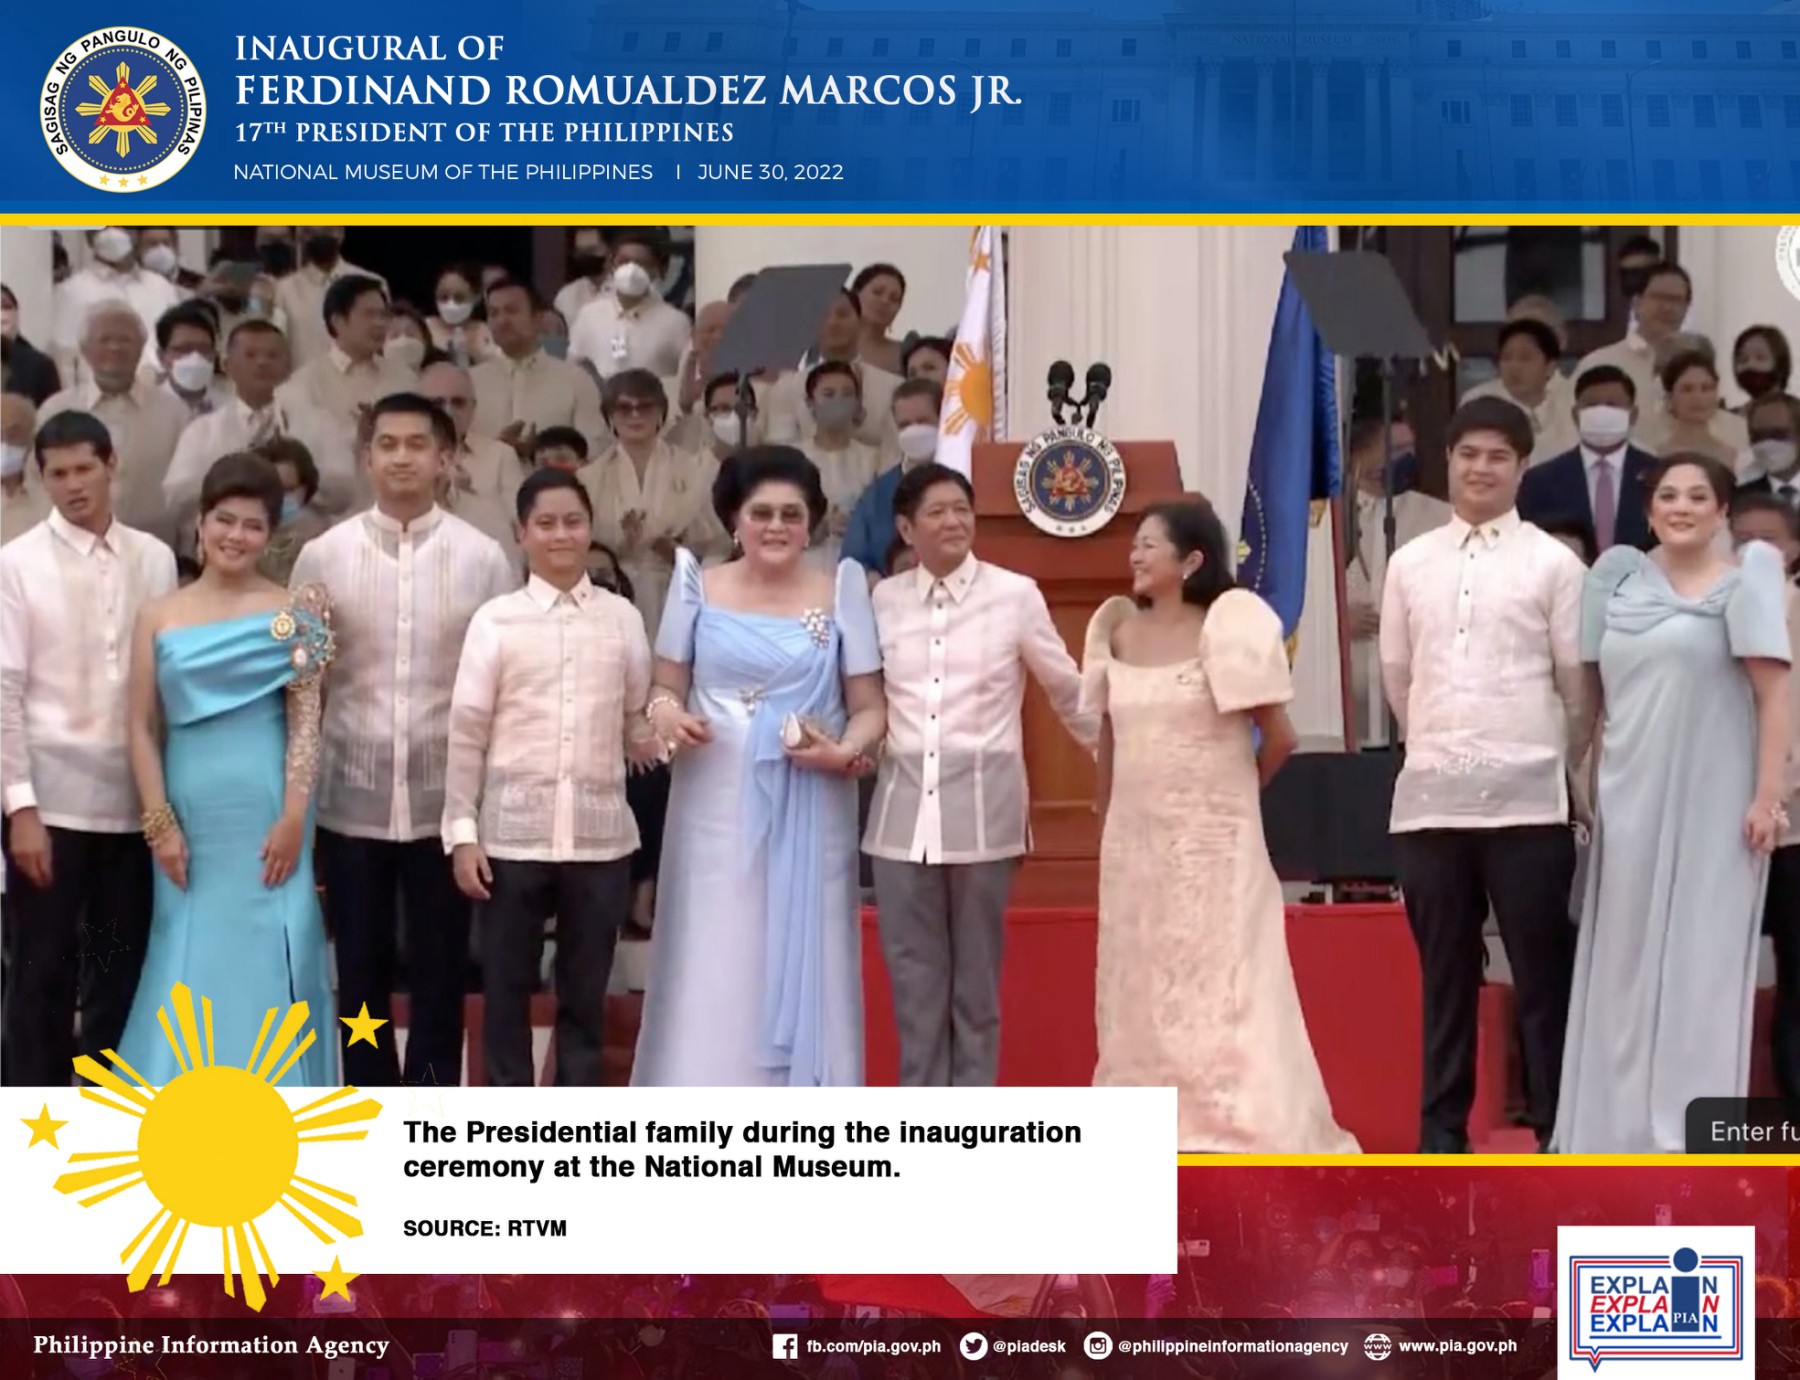 The first family at the stage during the inauguration ceremony at the National Museum